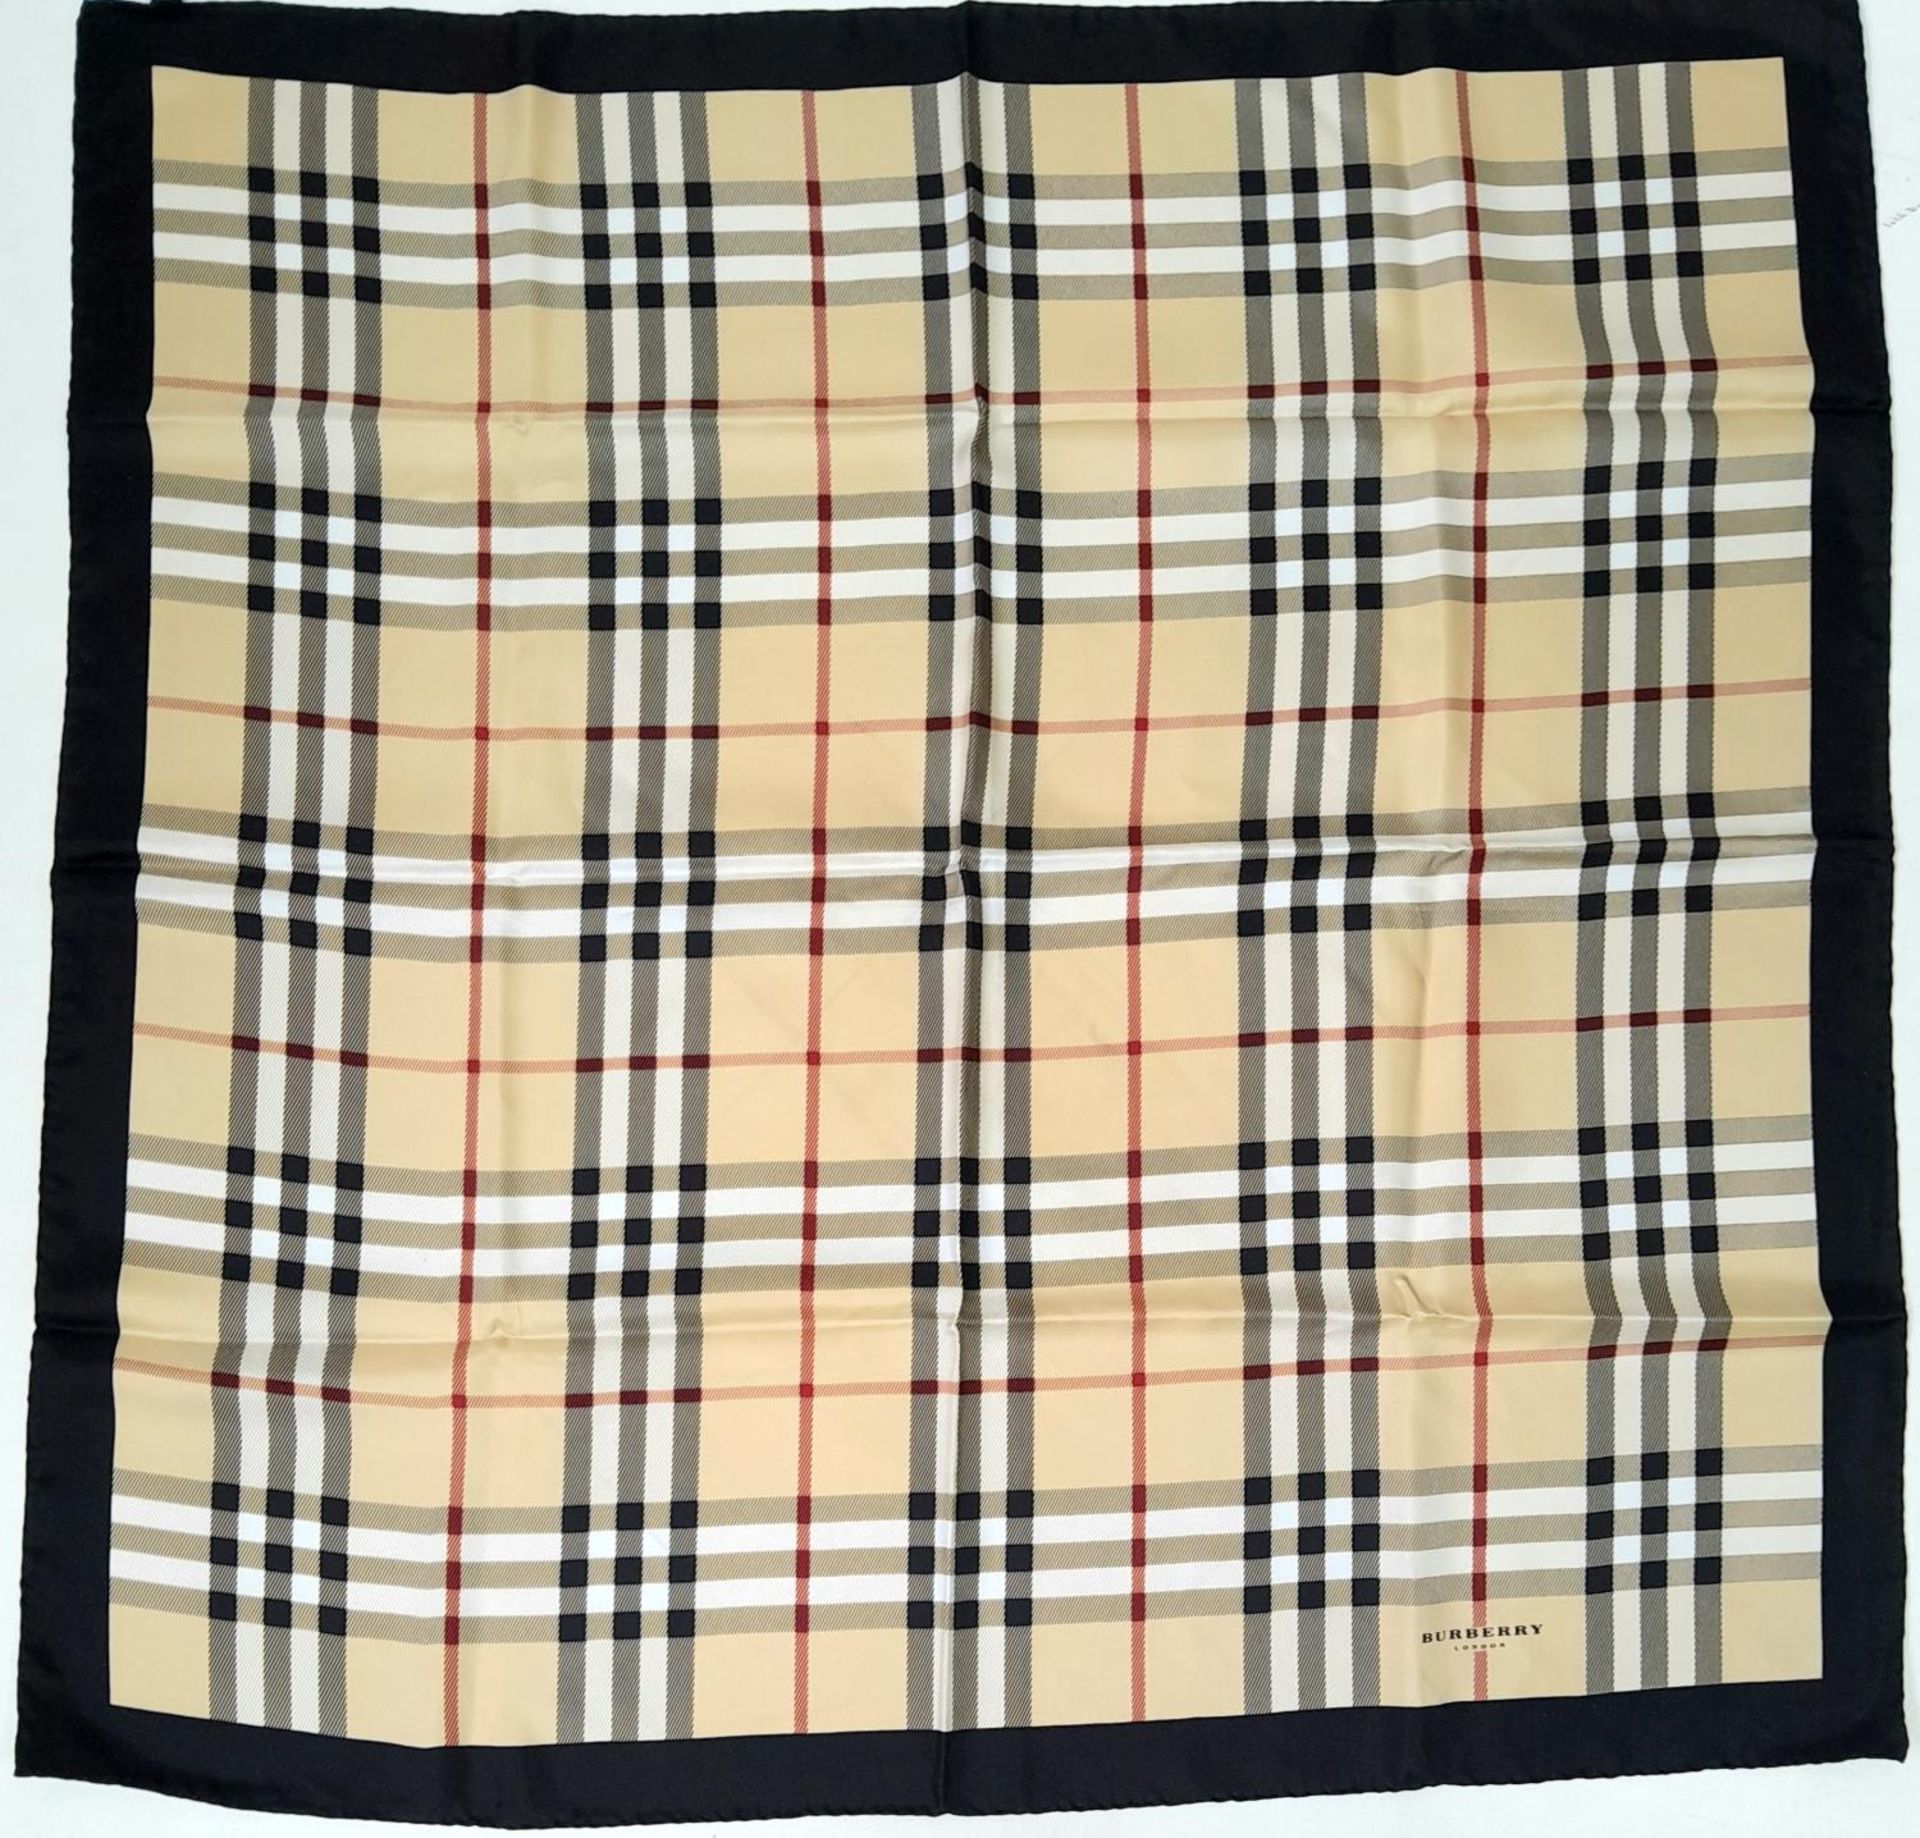 A Burberry Nova Check Scarf. 100% silk, made in Italy. Approximately 90cm x 90cm. Please see